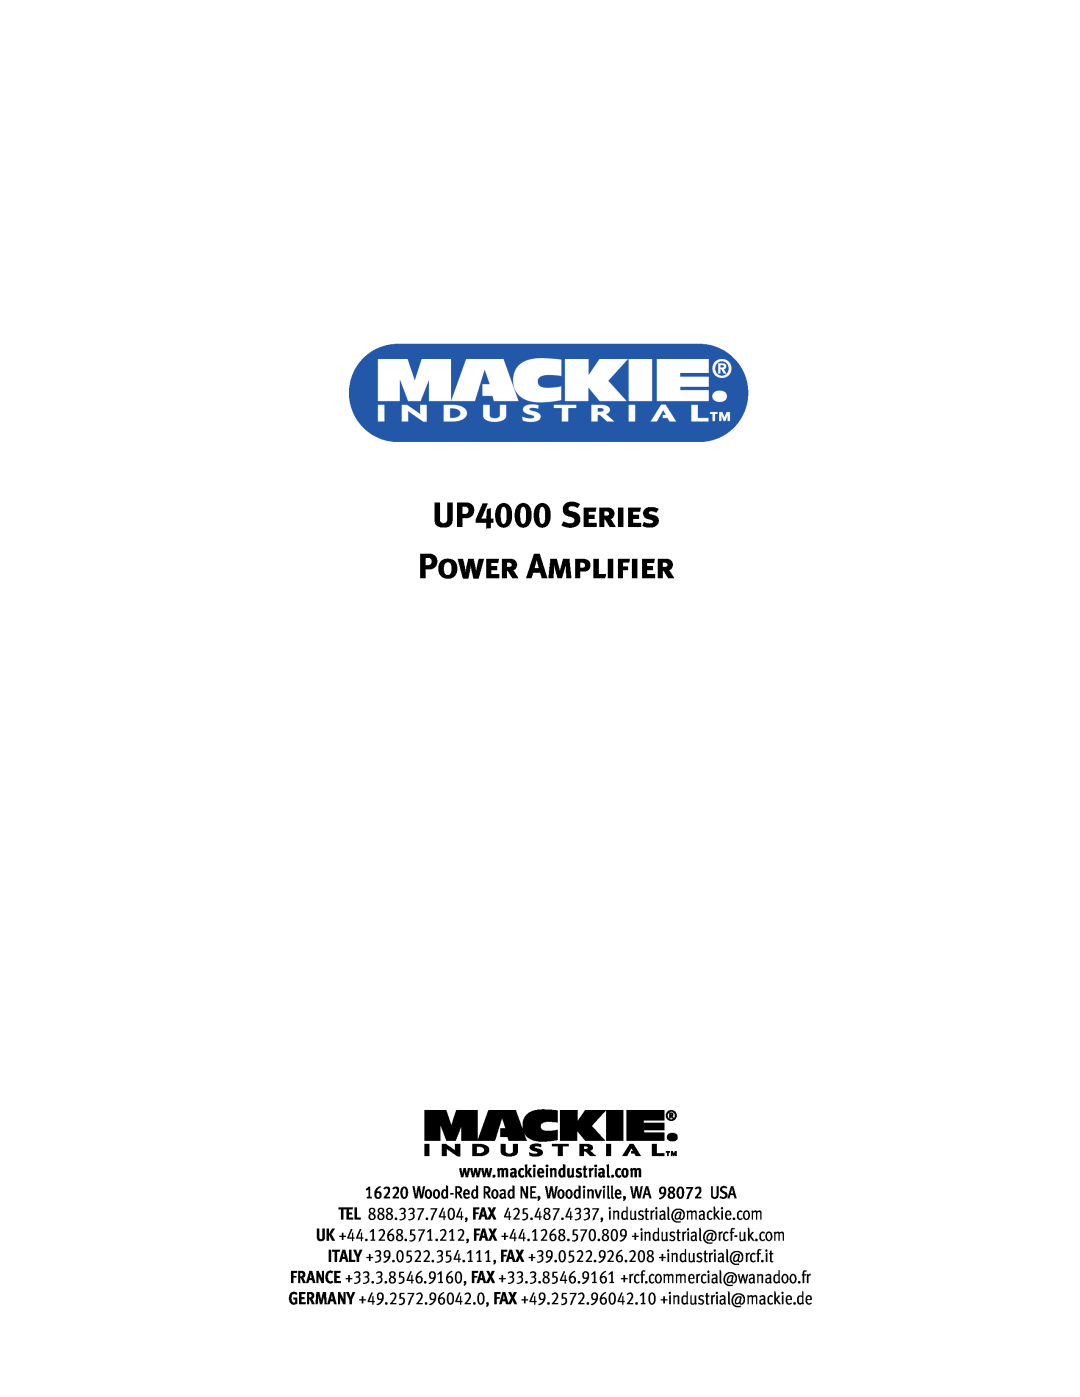 Mackie UP4161, UP4121, UP4061 instruction manual UP4000 Series Power Amplifier 